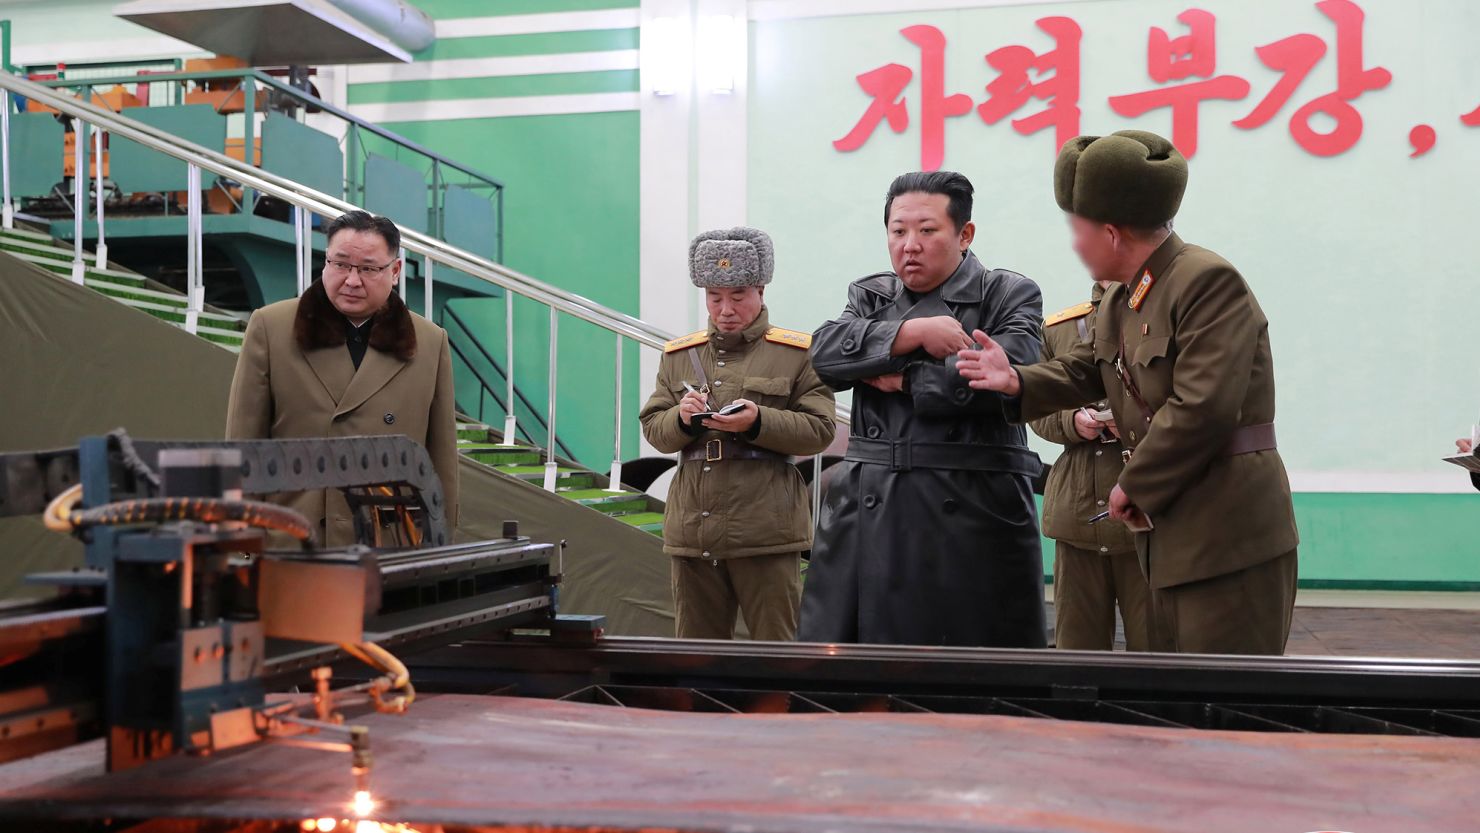 North Korea leader Kim Jong Un visits a munitions factory producing what state media KCNA says is a "major weapon system" at an undisclosed location in North Korea, in this photo released January 28, 2022 by North Korea's Korean Central News Agency (KCNA).    KCNA via REUTERS    ATTENTION EDITORS - THIS IMAGE WAS PROVIDED BY A THIRD PARTY. REUTERS IS UNABLE TO INDEPENDENTLY VERIFY THIS IMAGE. NO THIRD PARTY SALES. SOUTH KOREA OUT. NO COMMERCIAL OR EDITORIAL SALES IN SOUTH KOREA. THE IMAGE WAS DIGITALLY MASKED AT SOURCE.